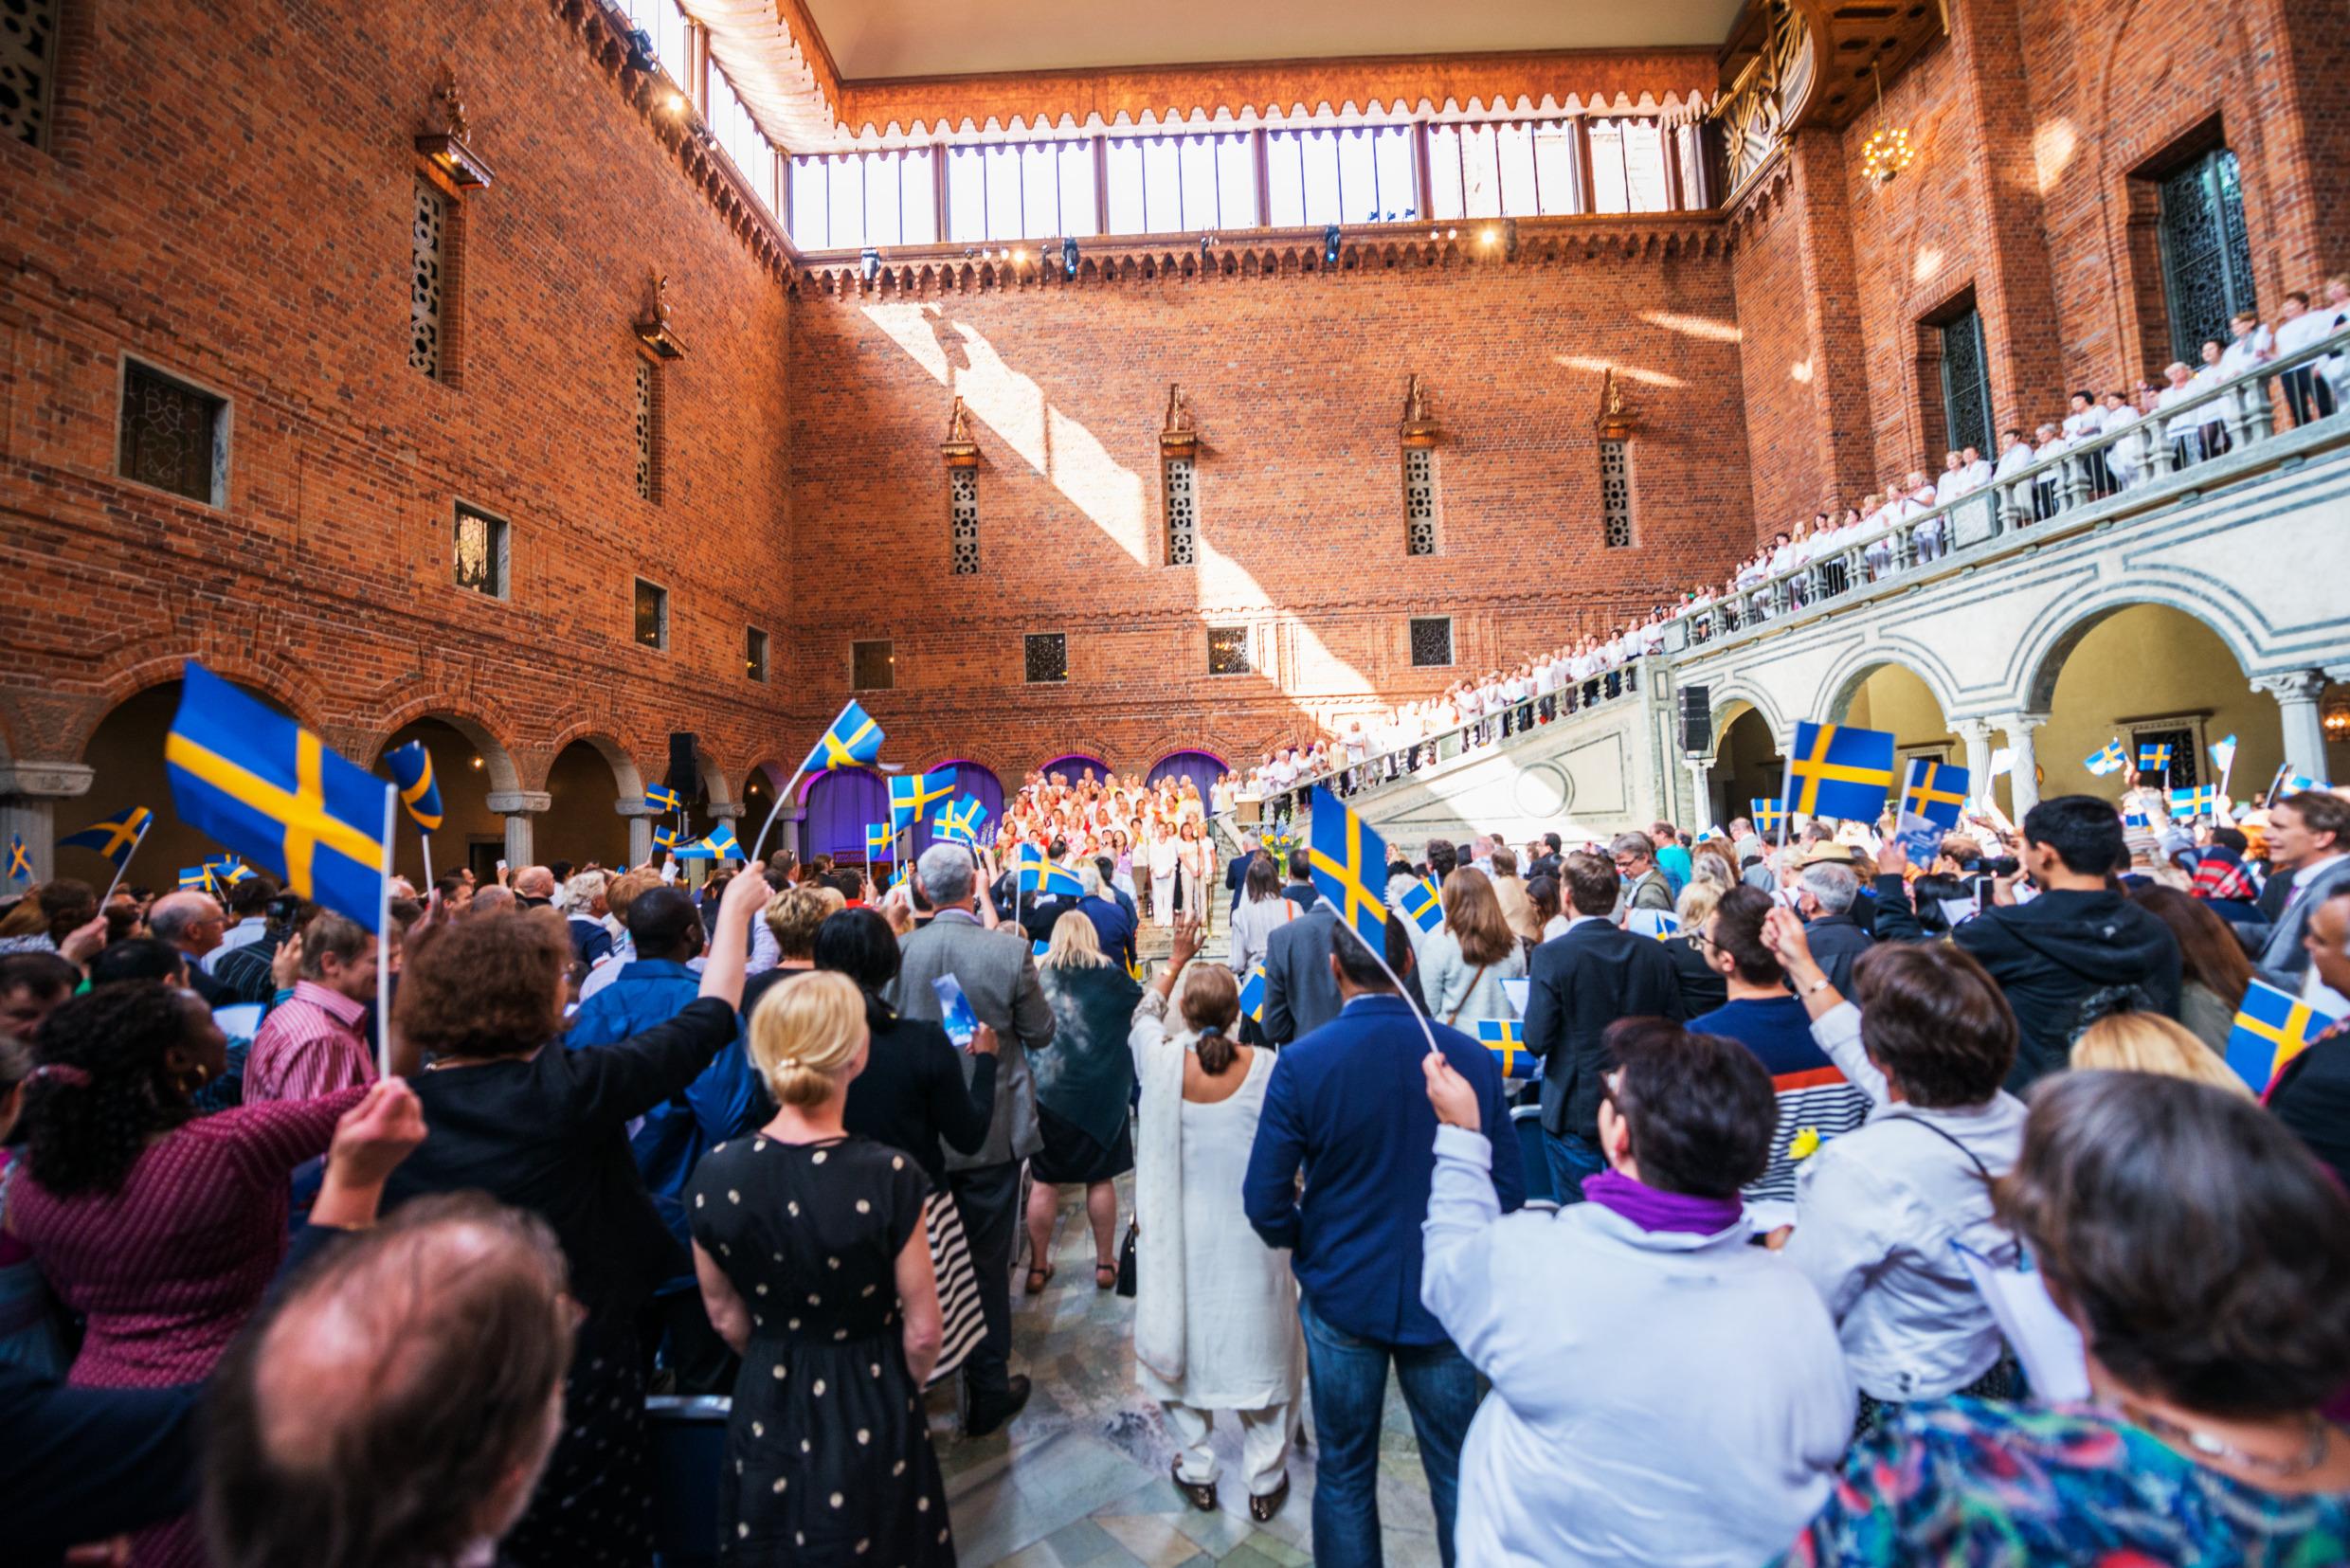 New Swedish citizens pose in the stairs during the welcome ceremony at Stockholm City Hall. They are welcomed by people waving Swedish flags. 